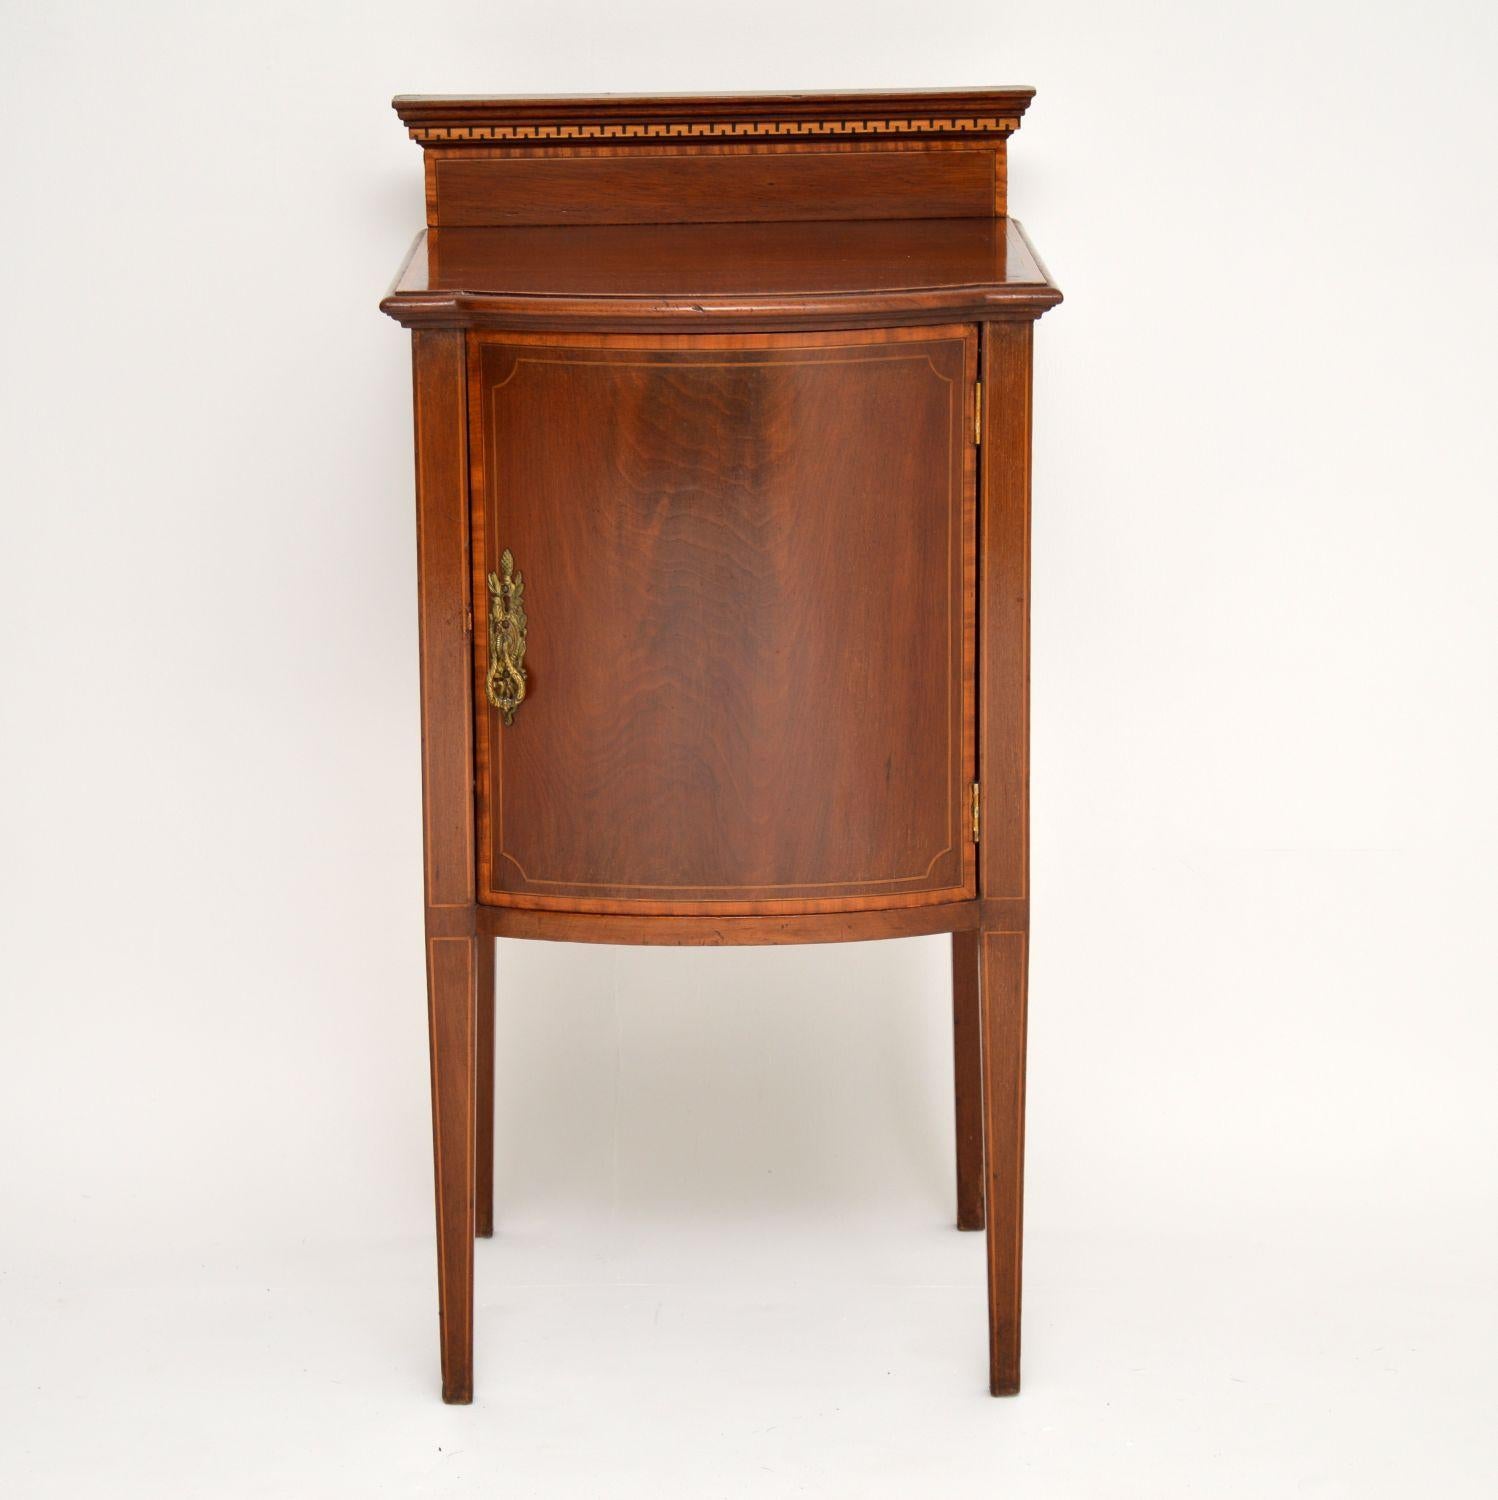 Antique Edwardian bow fronted bedside cabinet in mahogany with some fine satinwood inlays. This cabinet which dates from circa 1900-1910 period is in good condition, having just been French polished and could be very useful anywhere in the